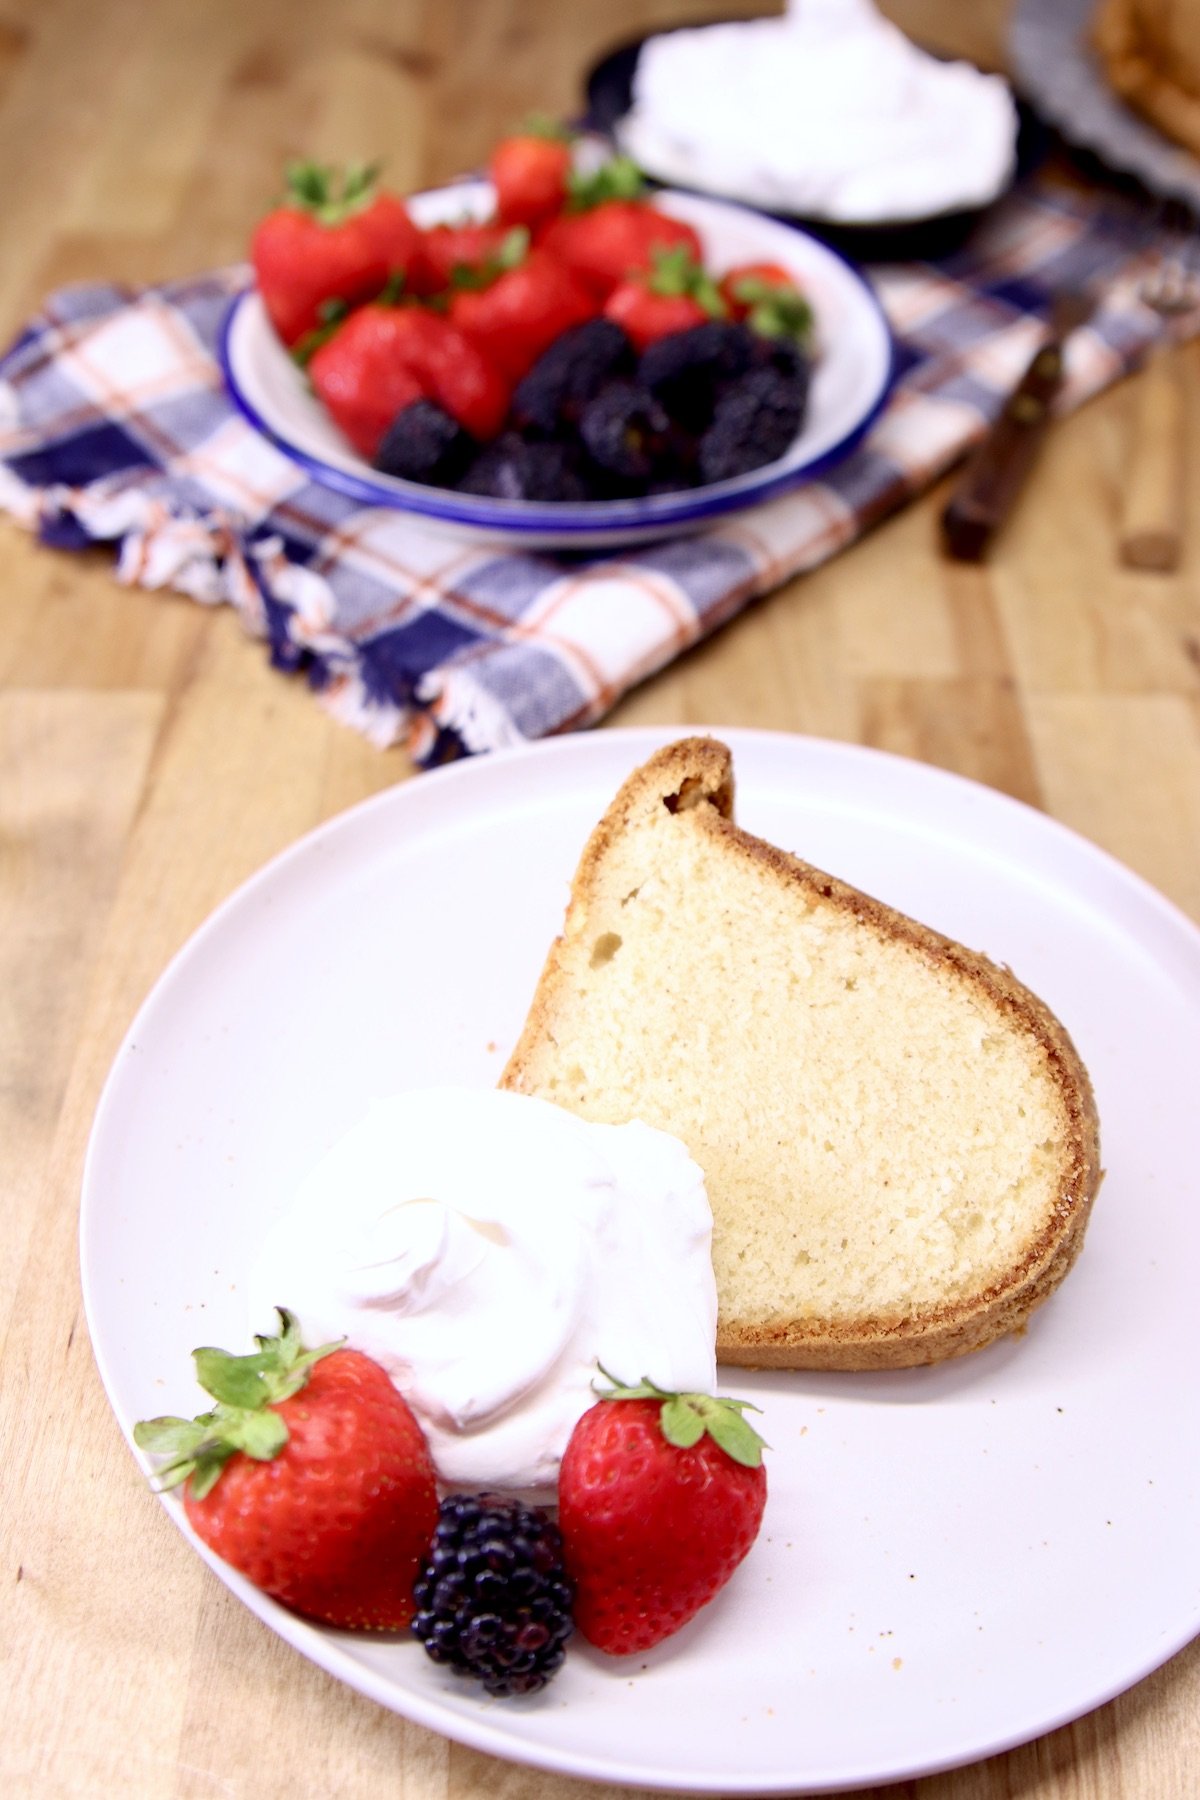 plate with sliced pound cake, whipped cream, berries